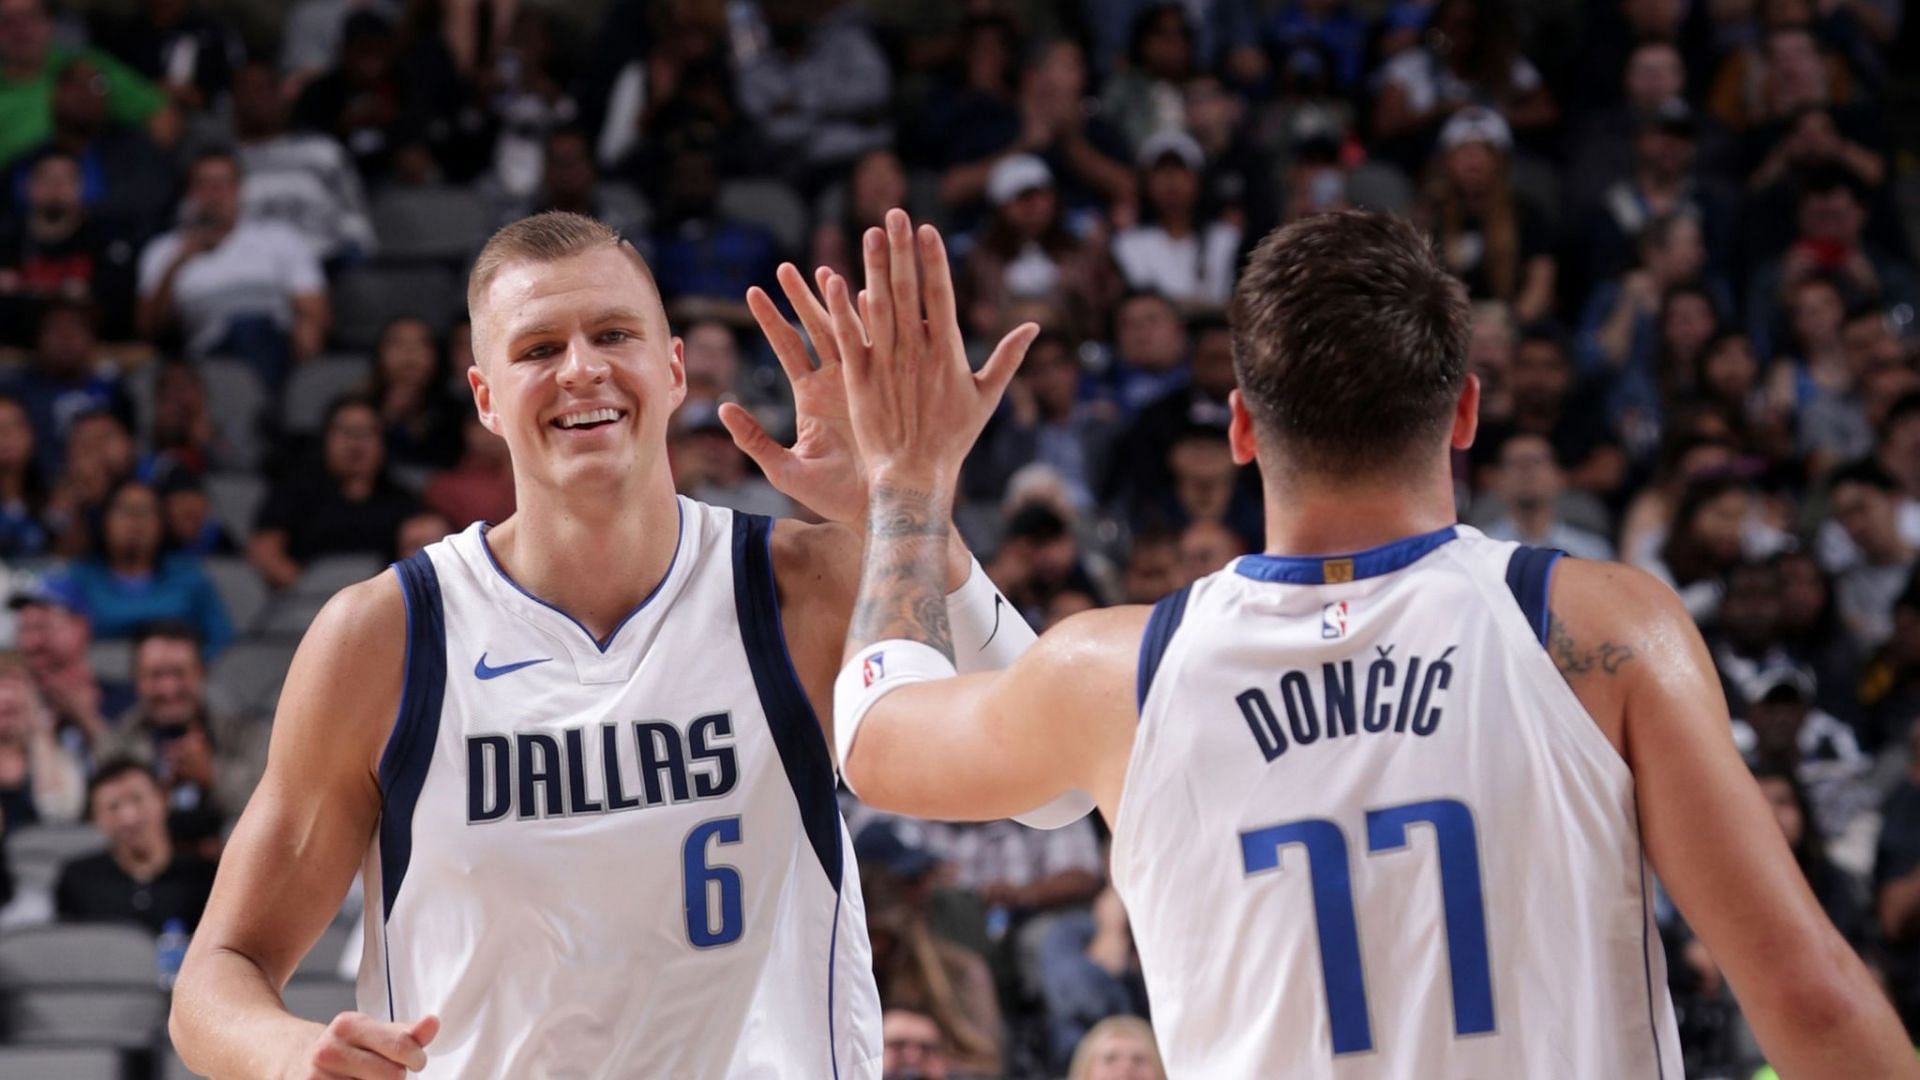 The Dallas Mavericks could have Luka Doncic and Kristaps Porzingis against the Denver Nuggets. [Photo: Sky Sports]